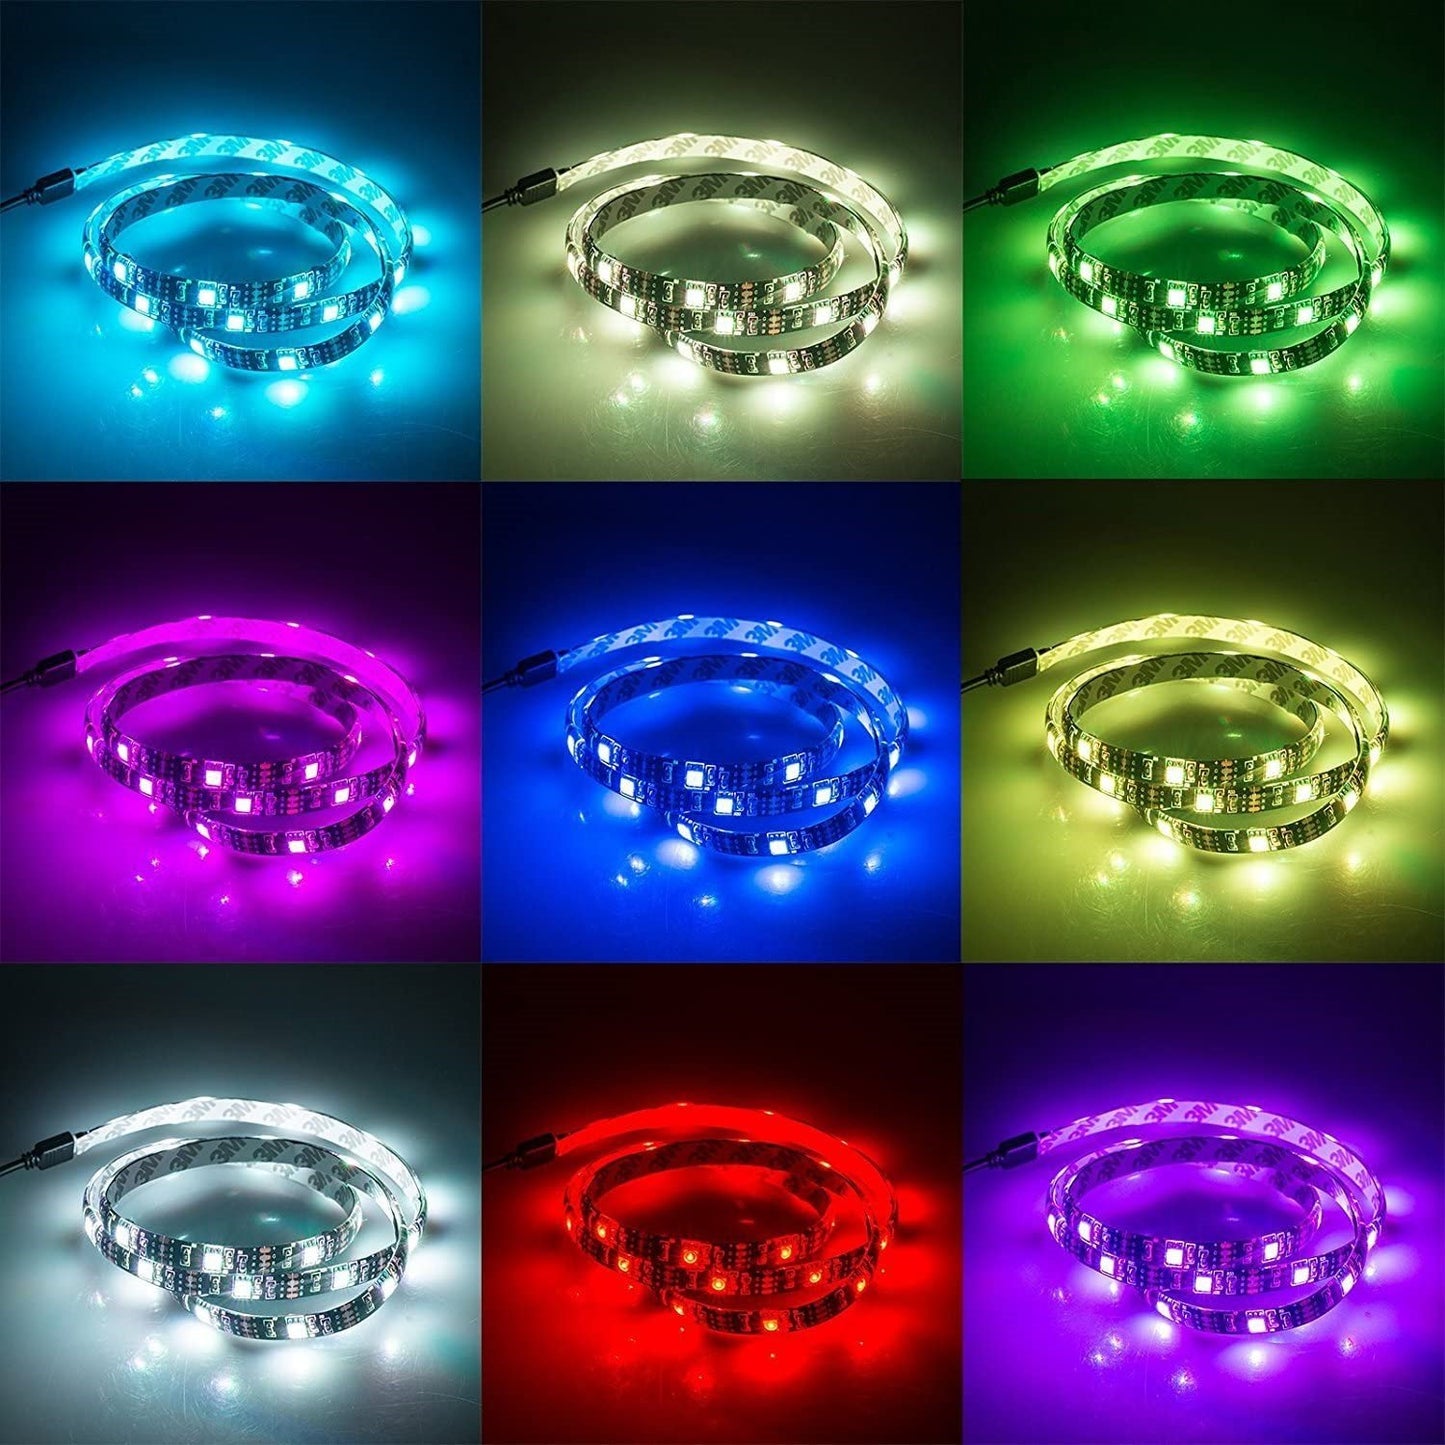 USB POWERED RGB LED LIGHTS FOR TV BACKLIGHT, 60”- 75” W/REMOTE CONTROL